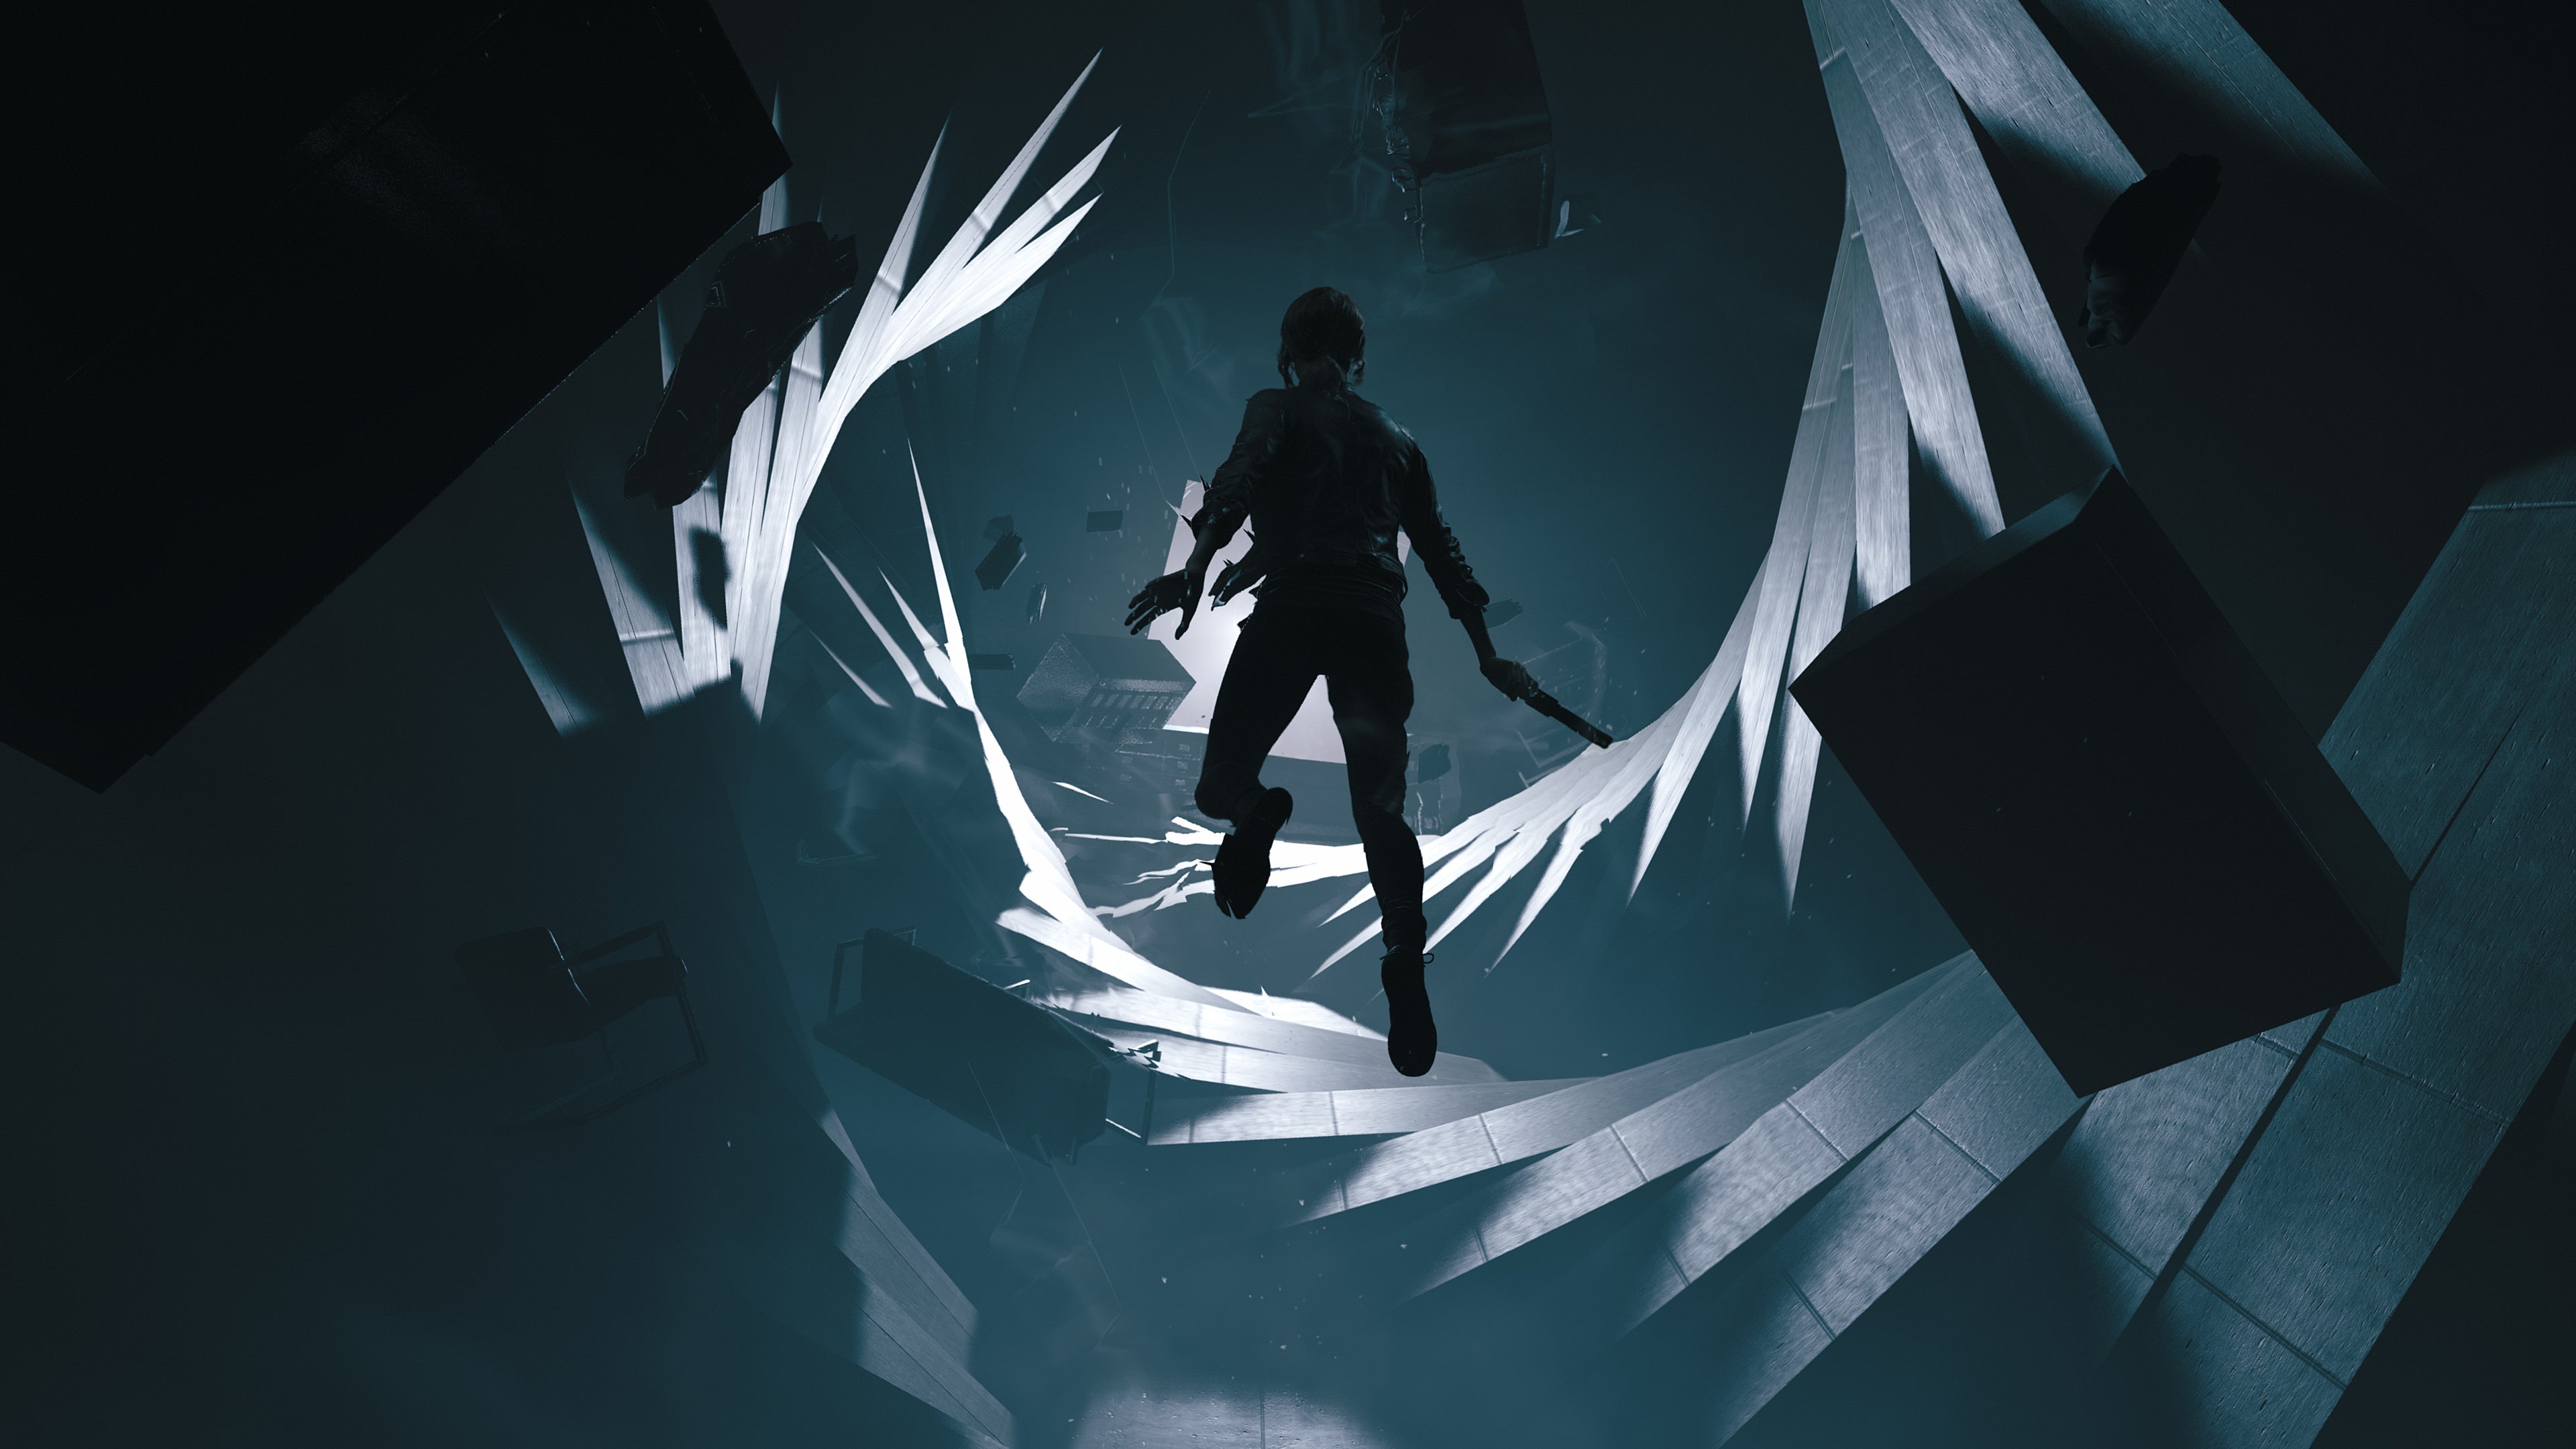 Image for Epic Games Store exclusives include Remedy's Control, "several major PC releases" from Ubisoft